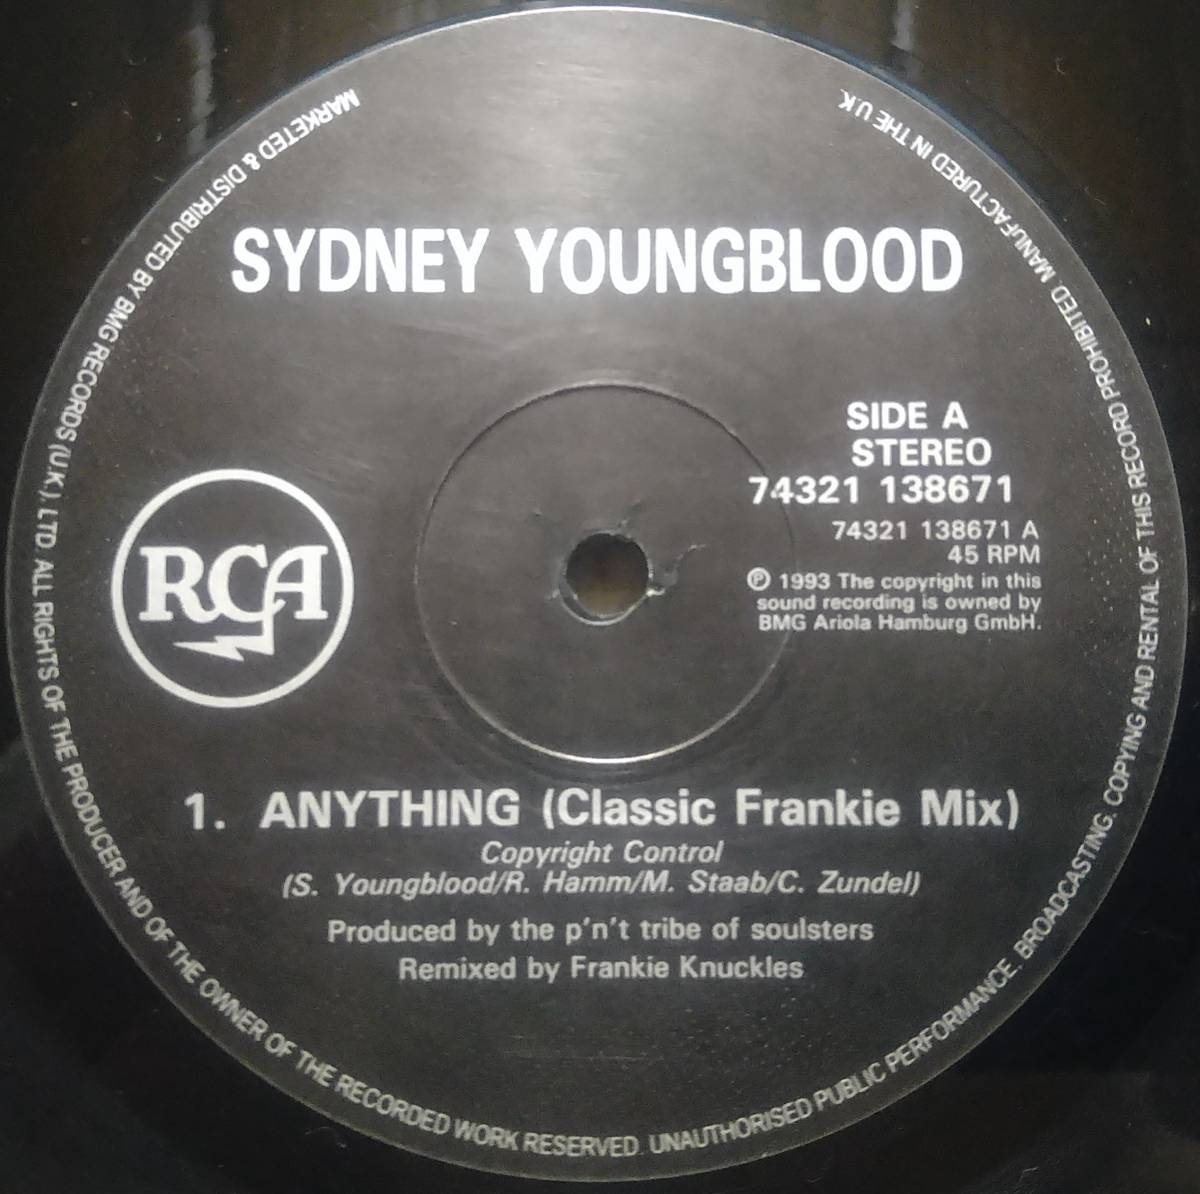 【12's R&B House】Sydney Youngblood「Anything」UK盤 Radio Edit.Frankie Knuckles Remix 各収録！の画像4